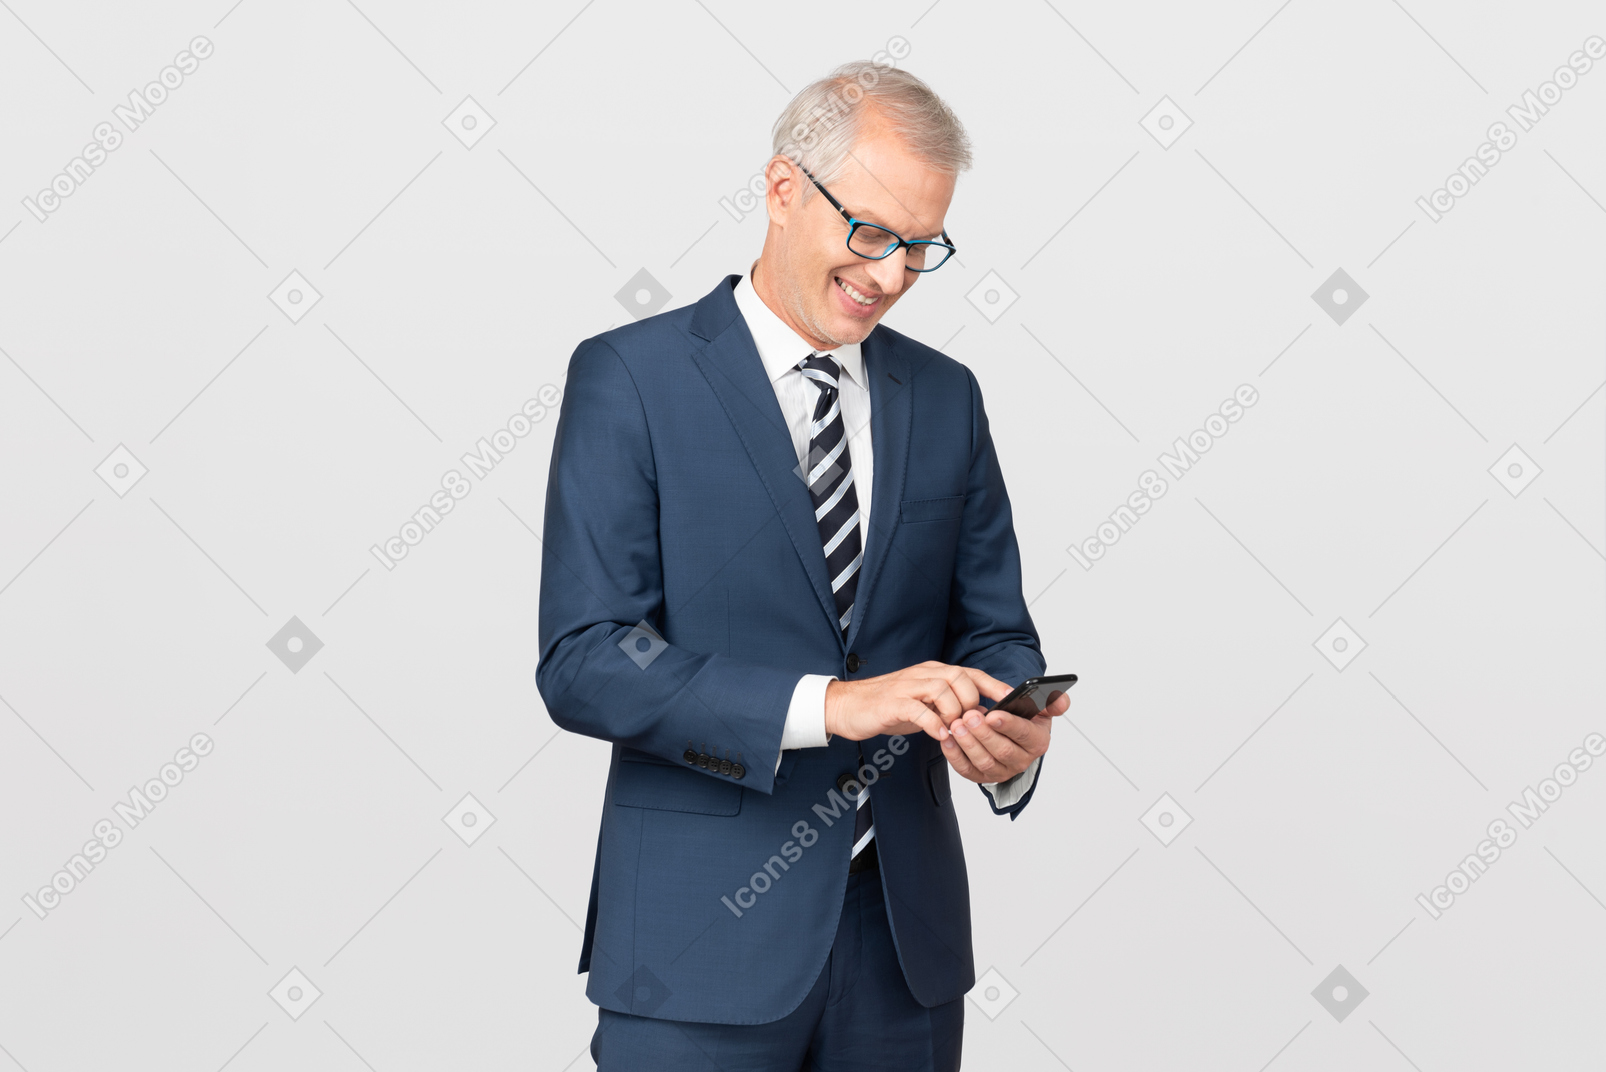 Elegant middle-aged man using his smartphone